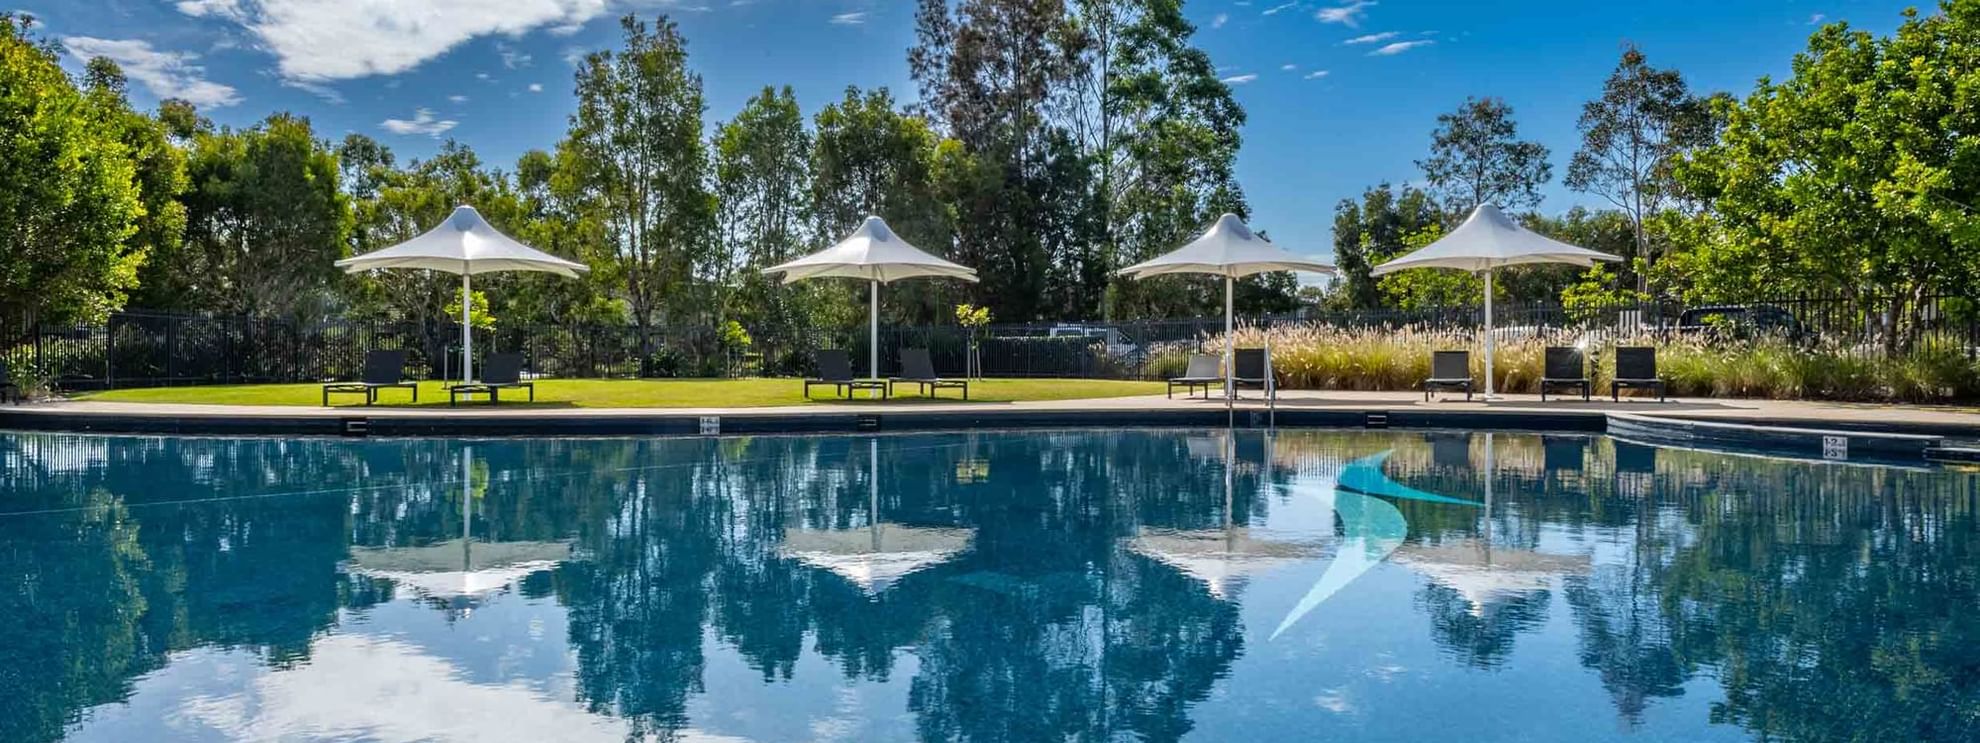 Central Coast Resort with Outdoor Pool in full sun